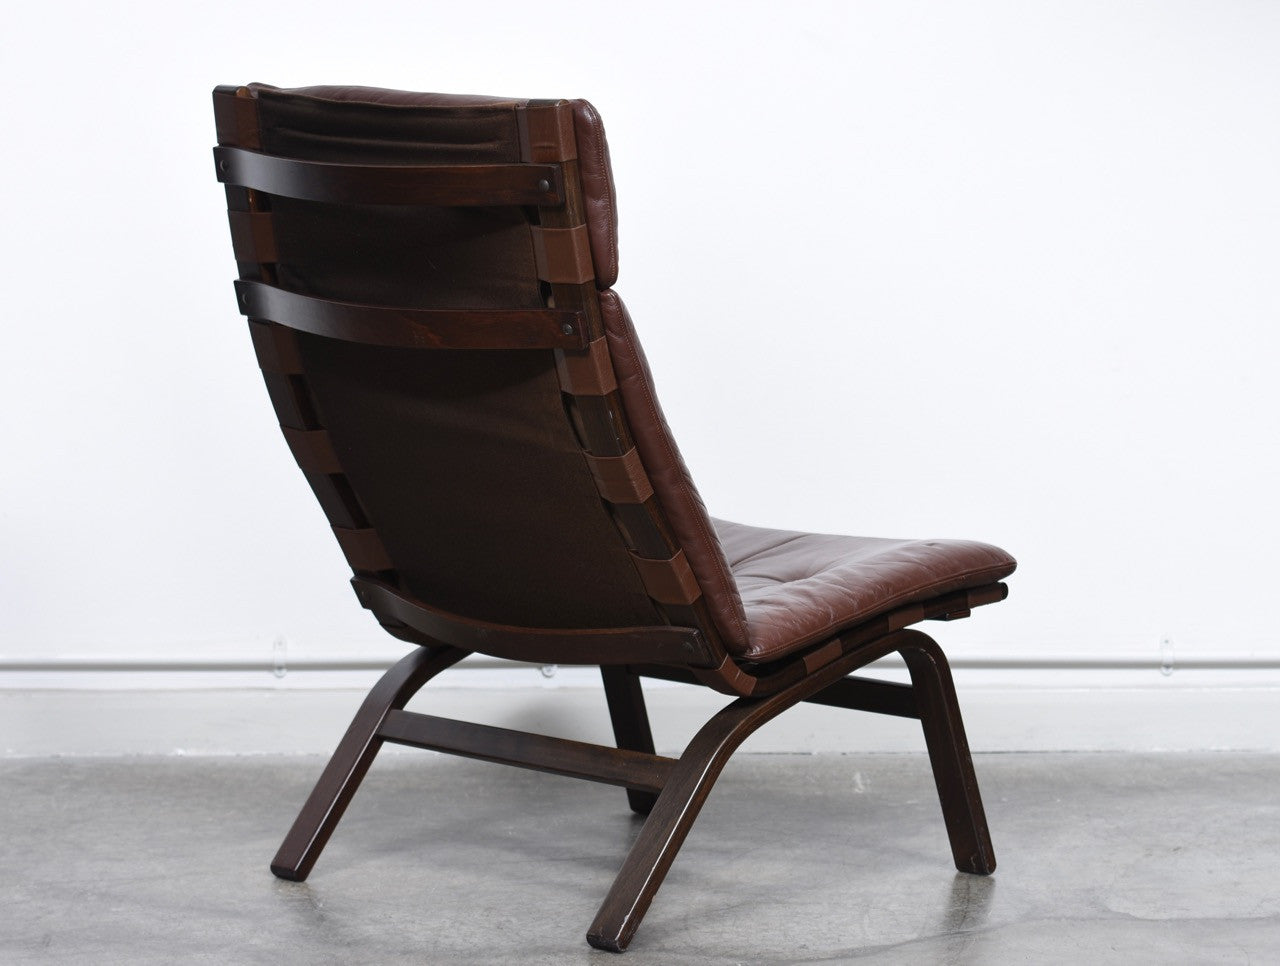 Leather lounger by Farstrup